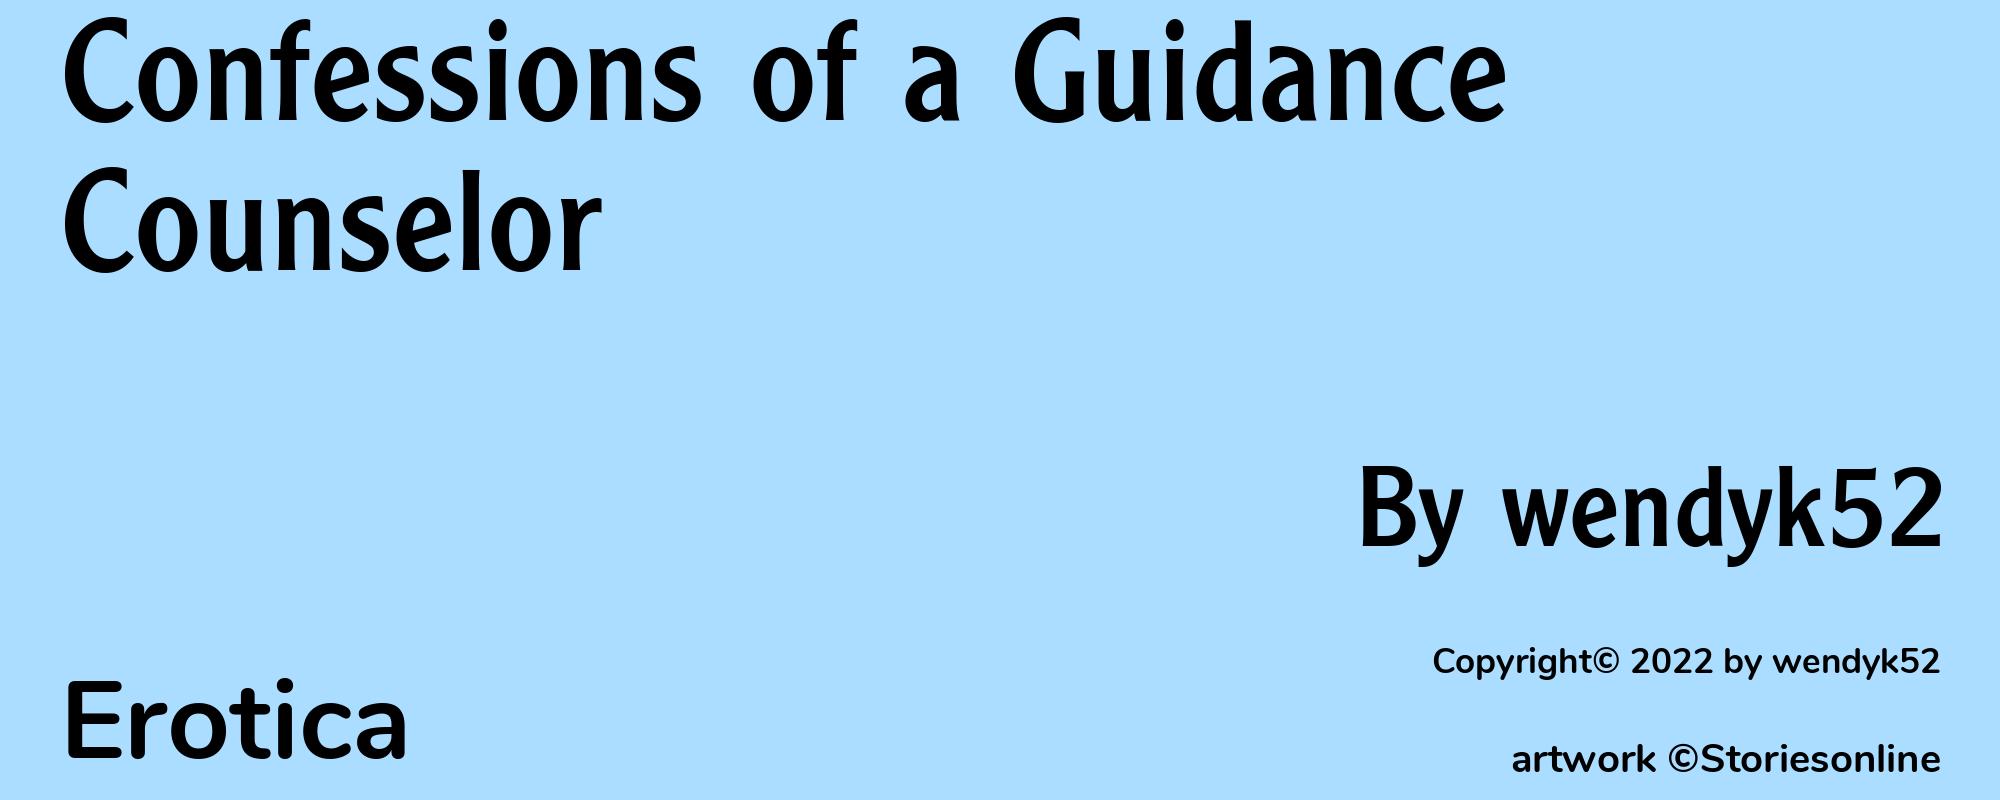 Confessions of a Guidance Counselor - Cover